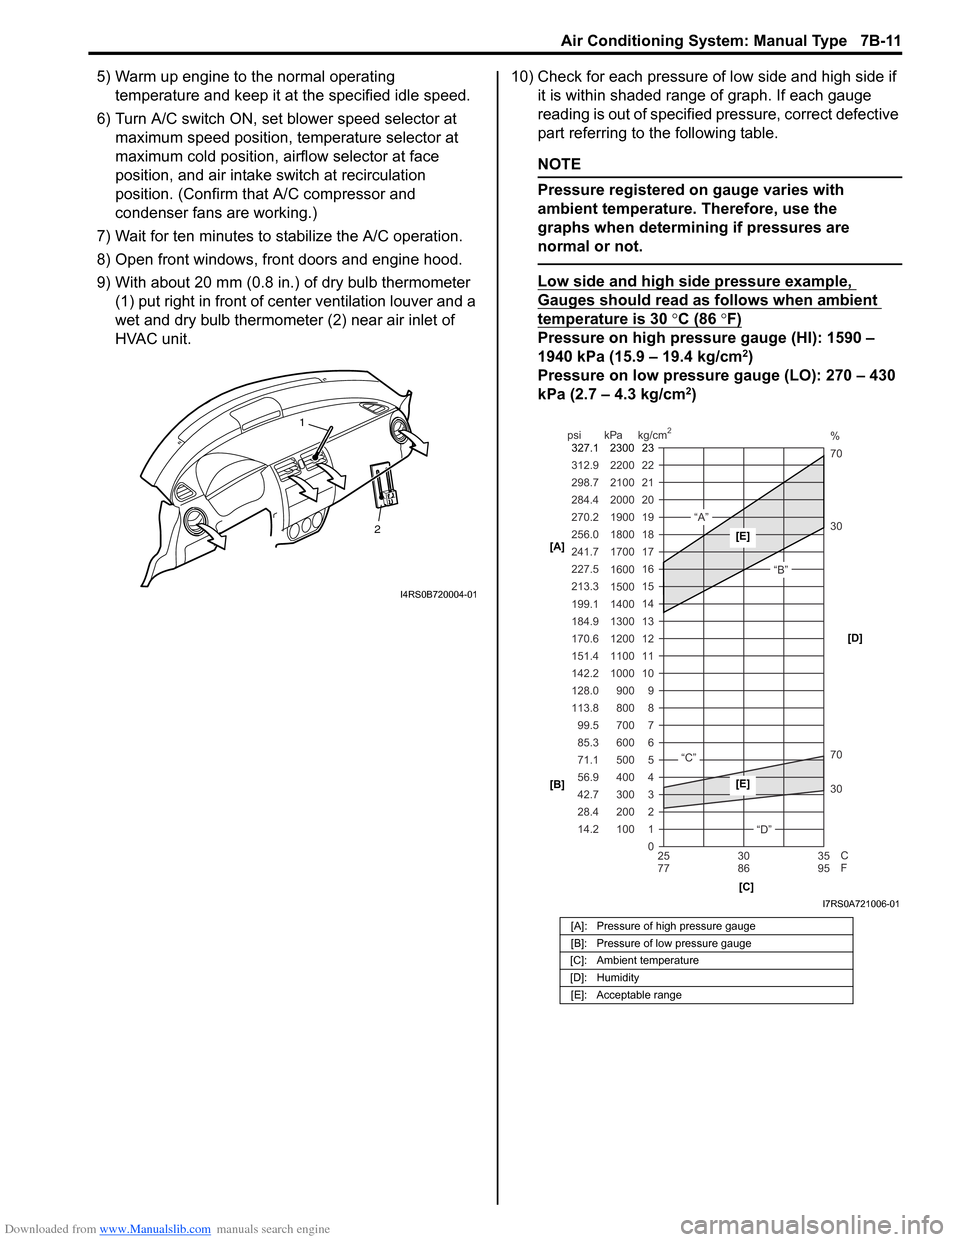 SUZUKI SWIFT 2006 2.G Service Manual Online Downloaded from www.Manualslib.com manuals search engine Air Conditioning System: Manual Type 7B-11
5) Warm up engine to the normal operating temperature and keep it at the specified idle speed.
6) Tu